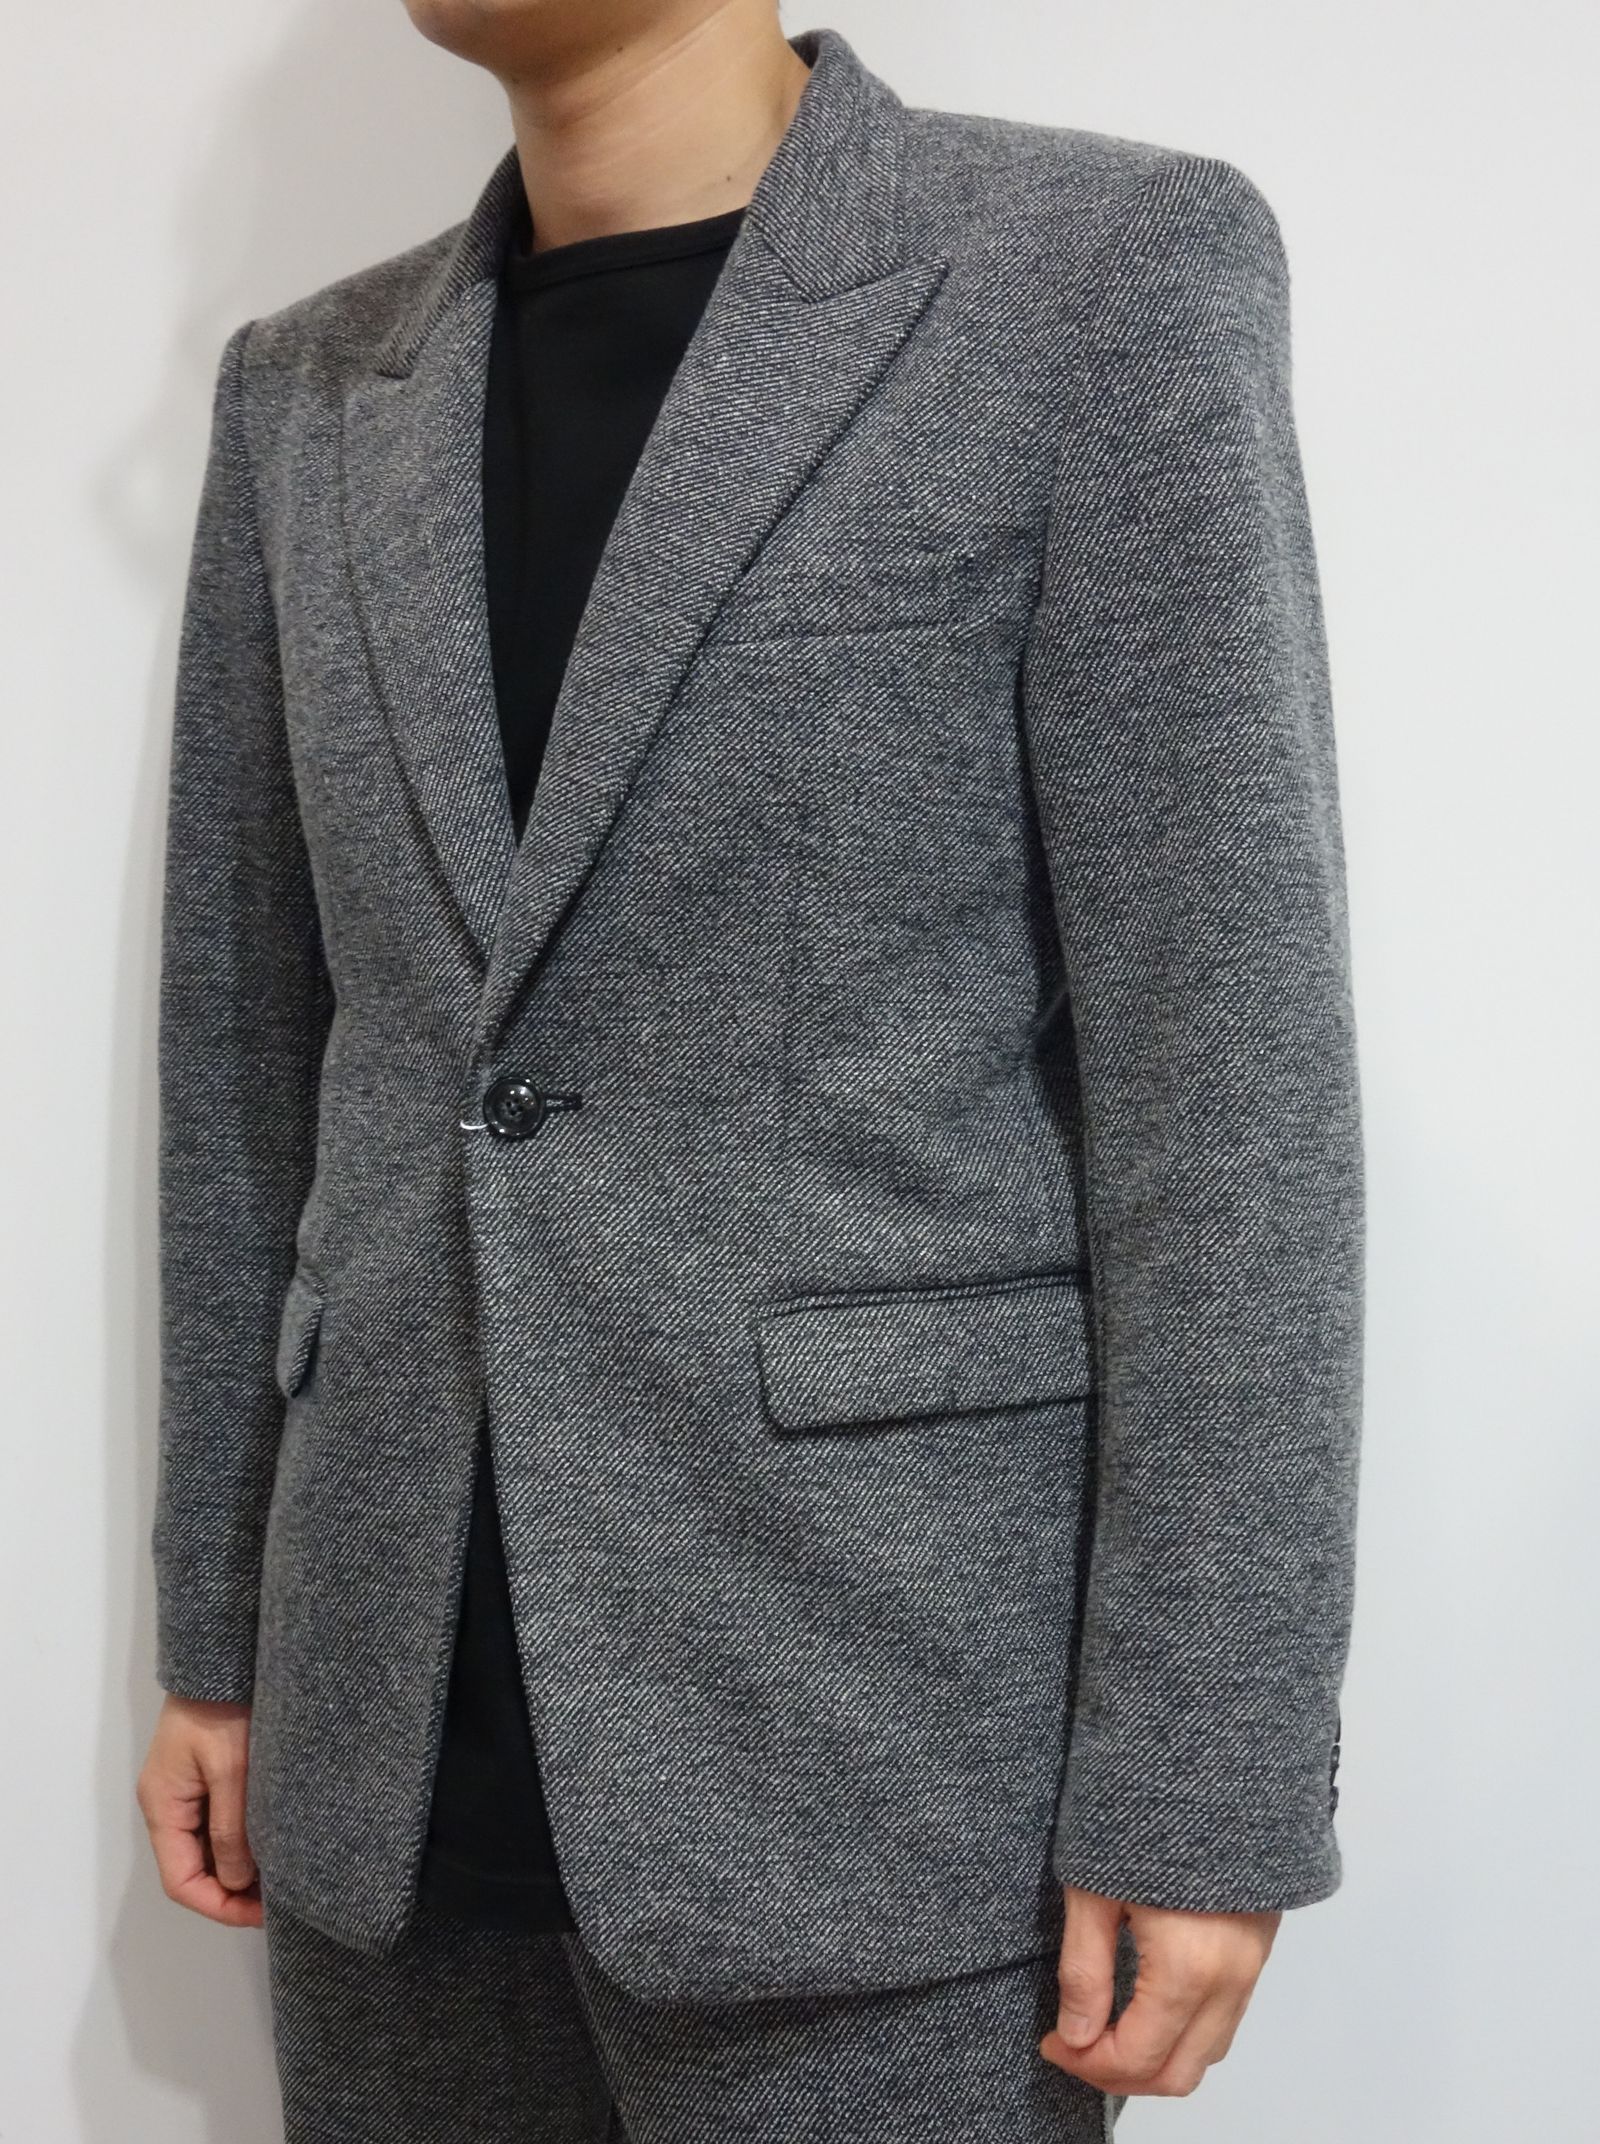 RESOUND CLOTHING - 【※期間限定販売※】 TWEED JERSEY LUCILLE JACKET